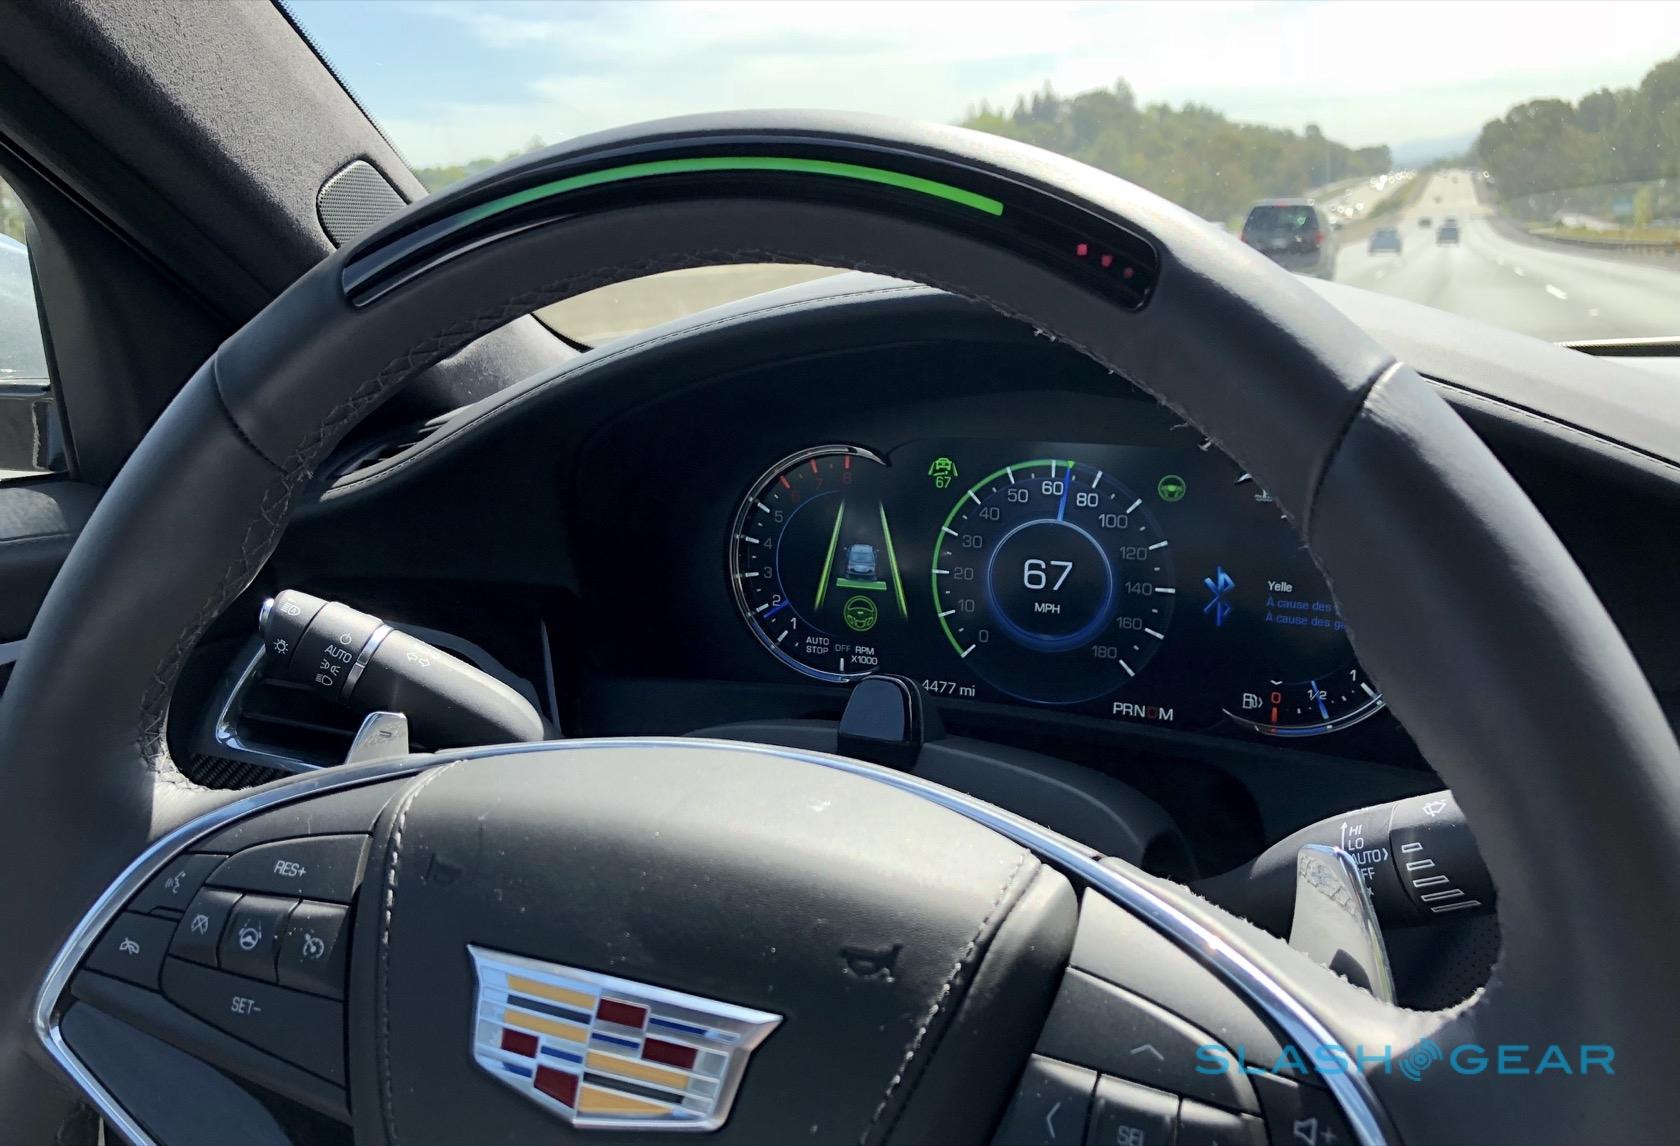 off road steering wheel Cadillac super cruise review: i like this more than tesla autopilot